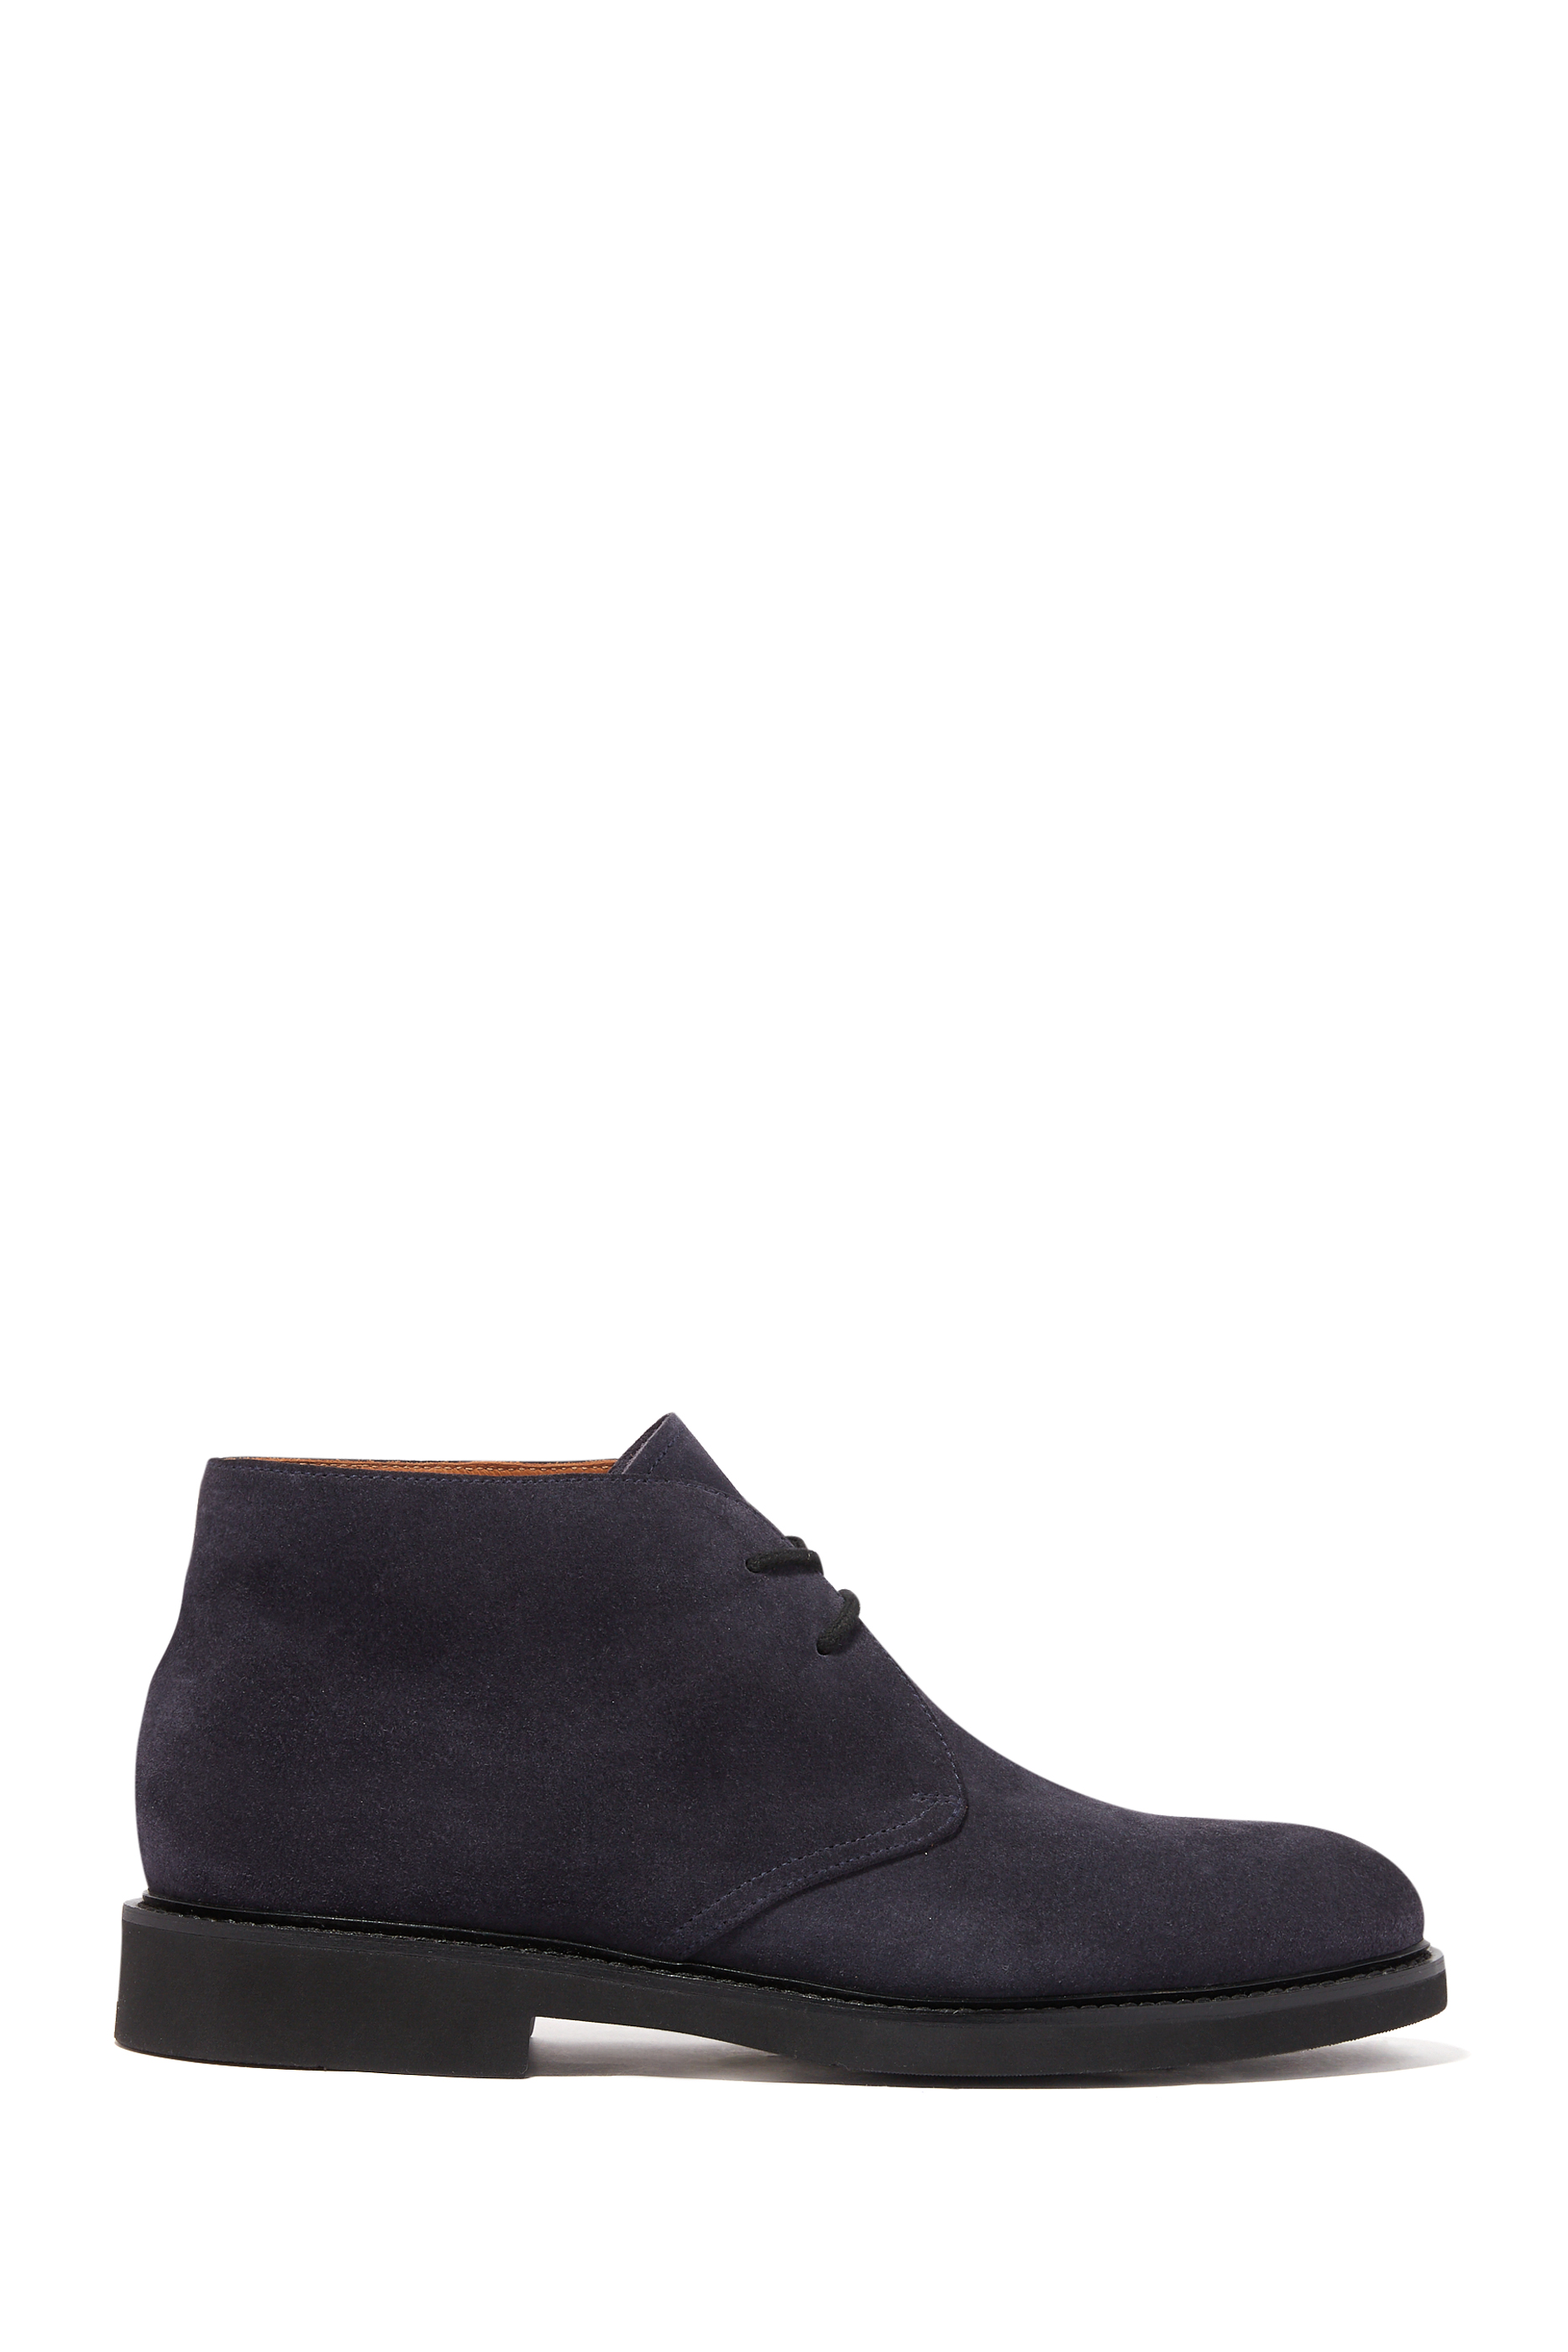 Buy Doucals Suede Lace-Up Boots for Mens | Bloomingdale's UAE